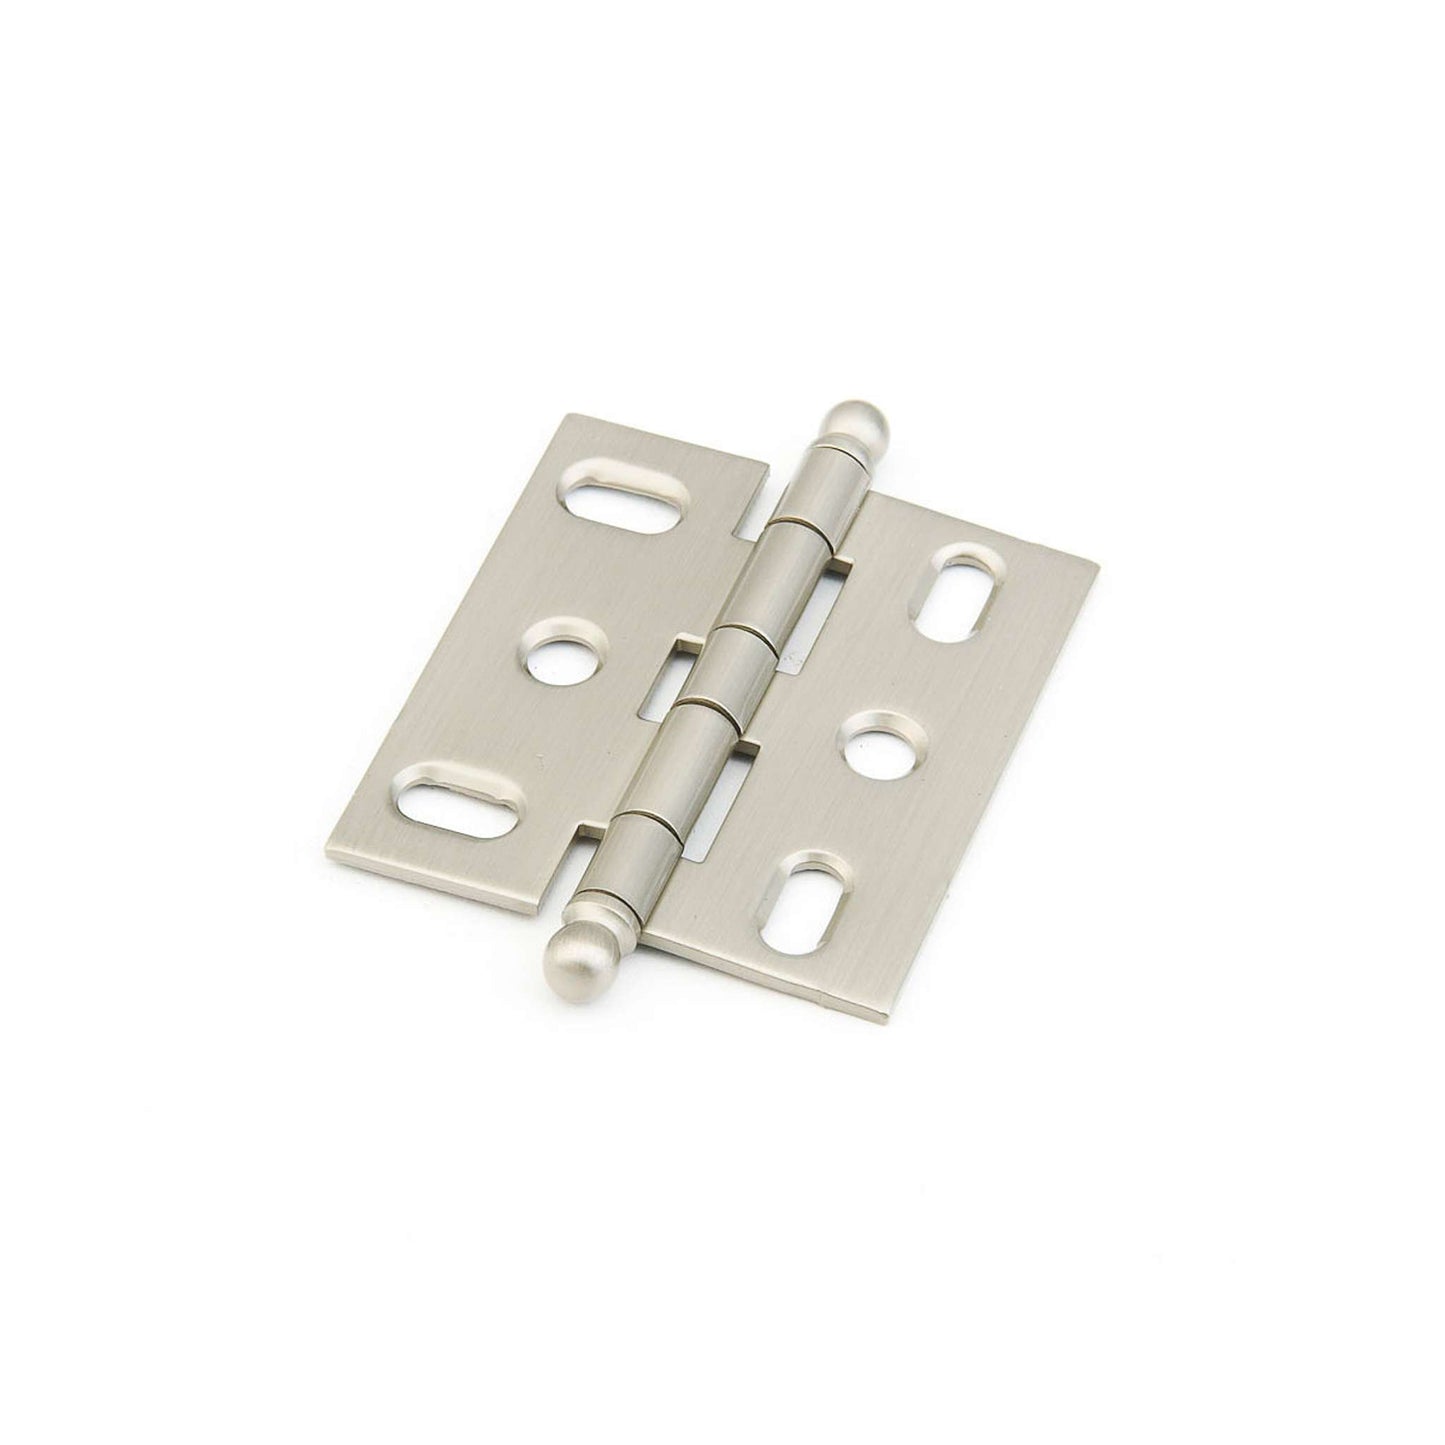 Schaub and Company - Cabinet Hinges - Ball Tip Mortise